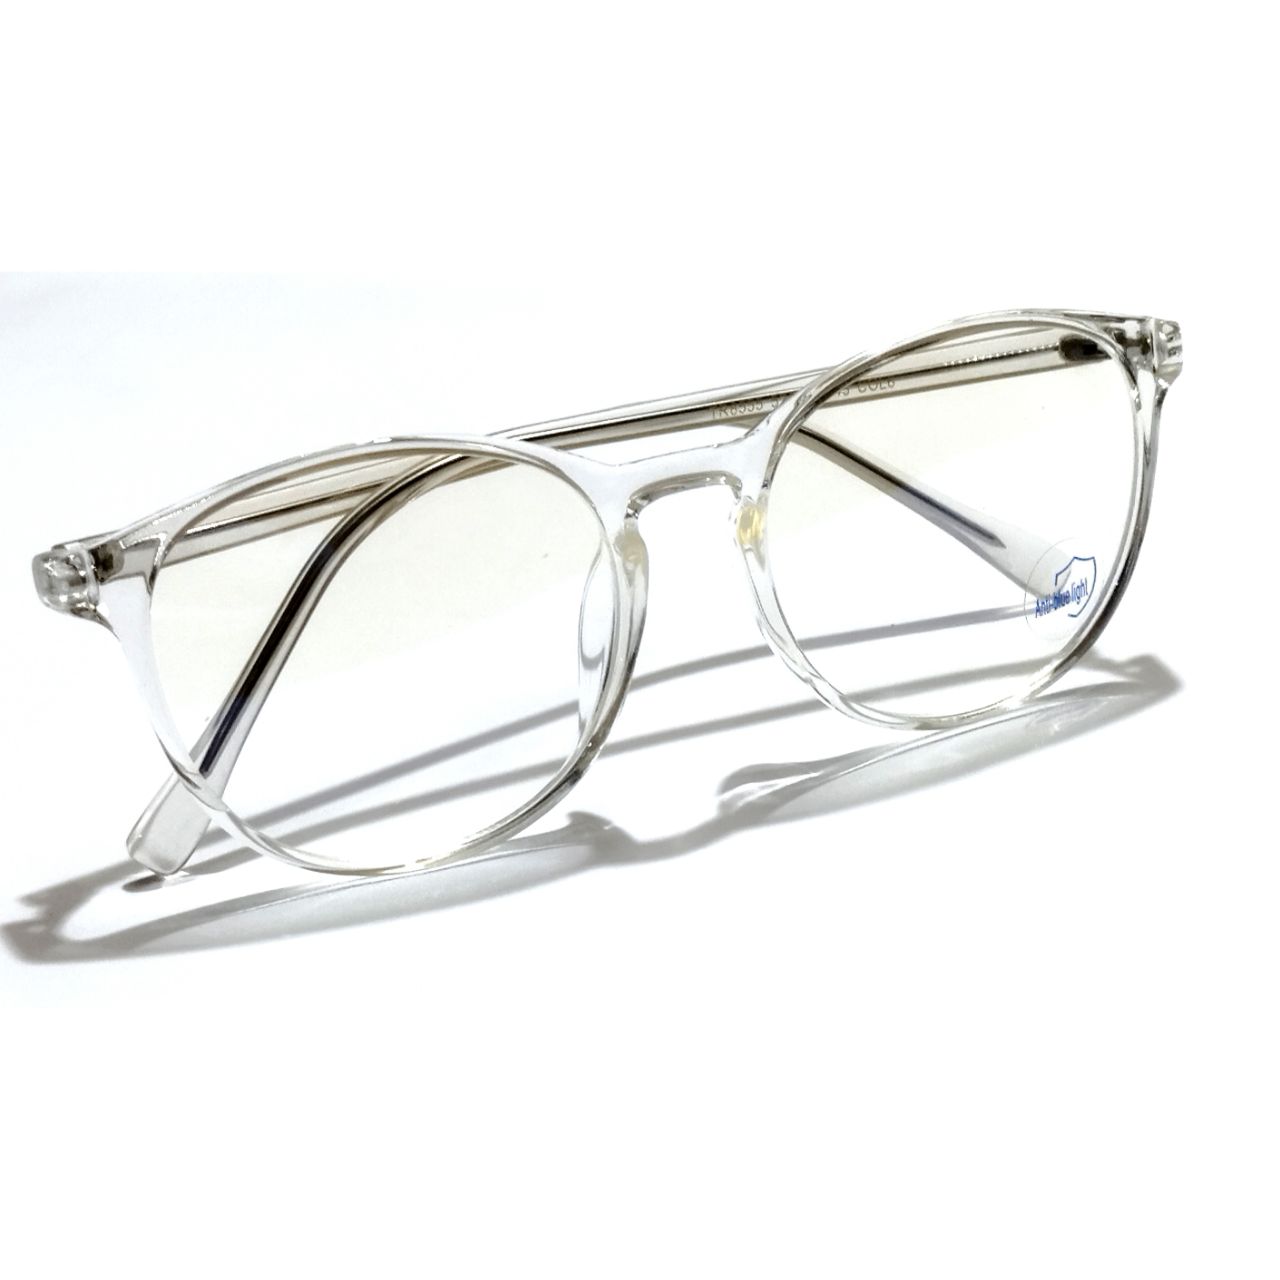 ARTView Clear Round Transparent Glasses for Men and Women M8555 C6